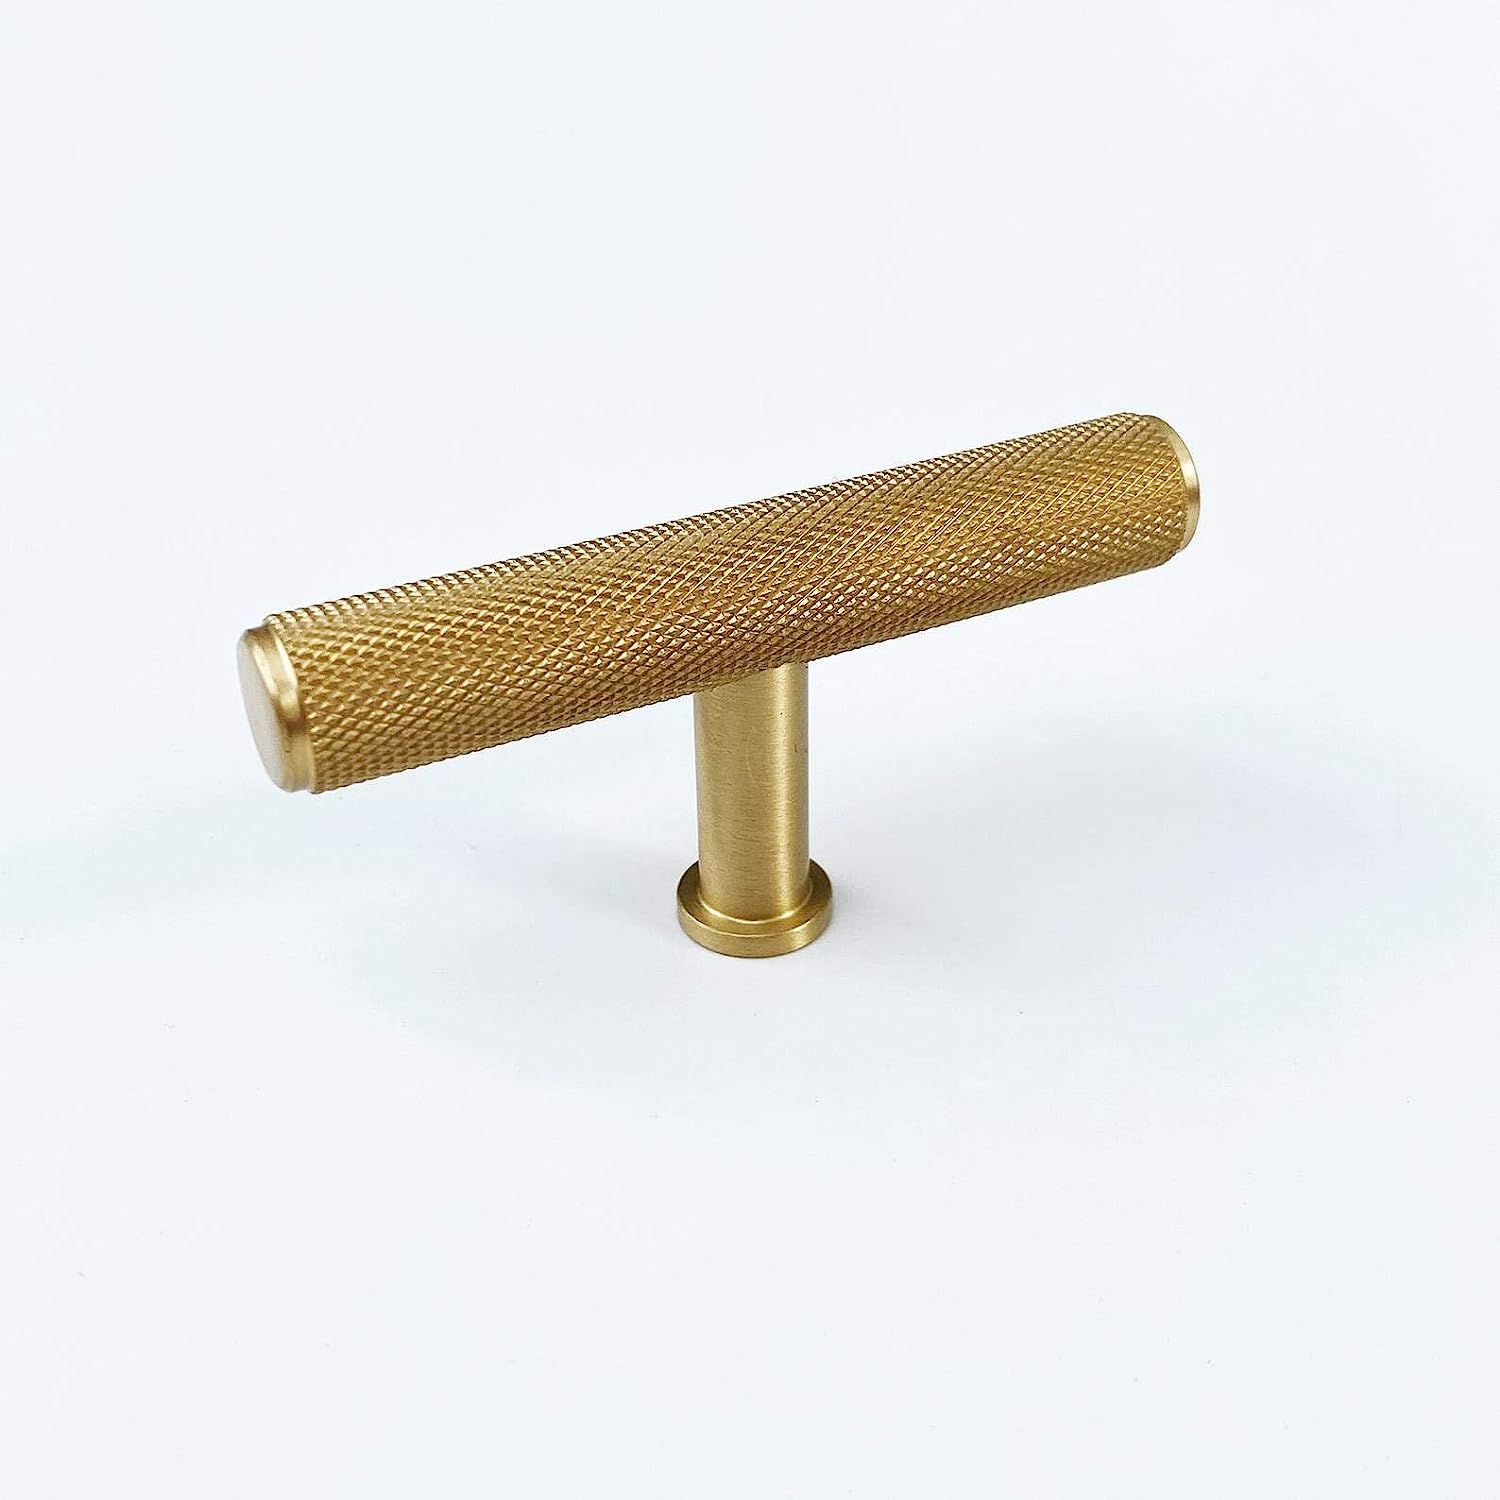 Knurled Texture Solid Brass Knurled Hardware Cabinet T-Bar Pull Handles - Round Bar Series - Brus... | Amazon (US)